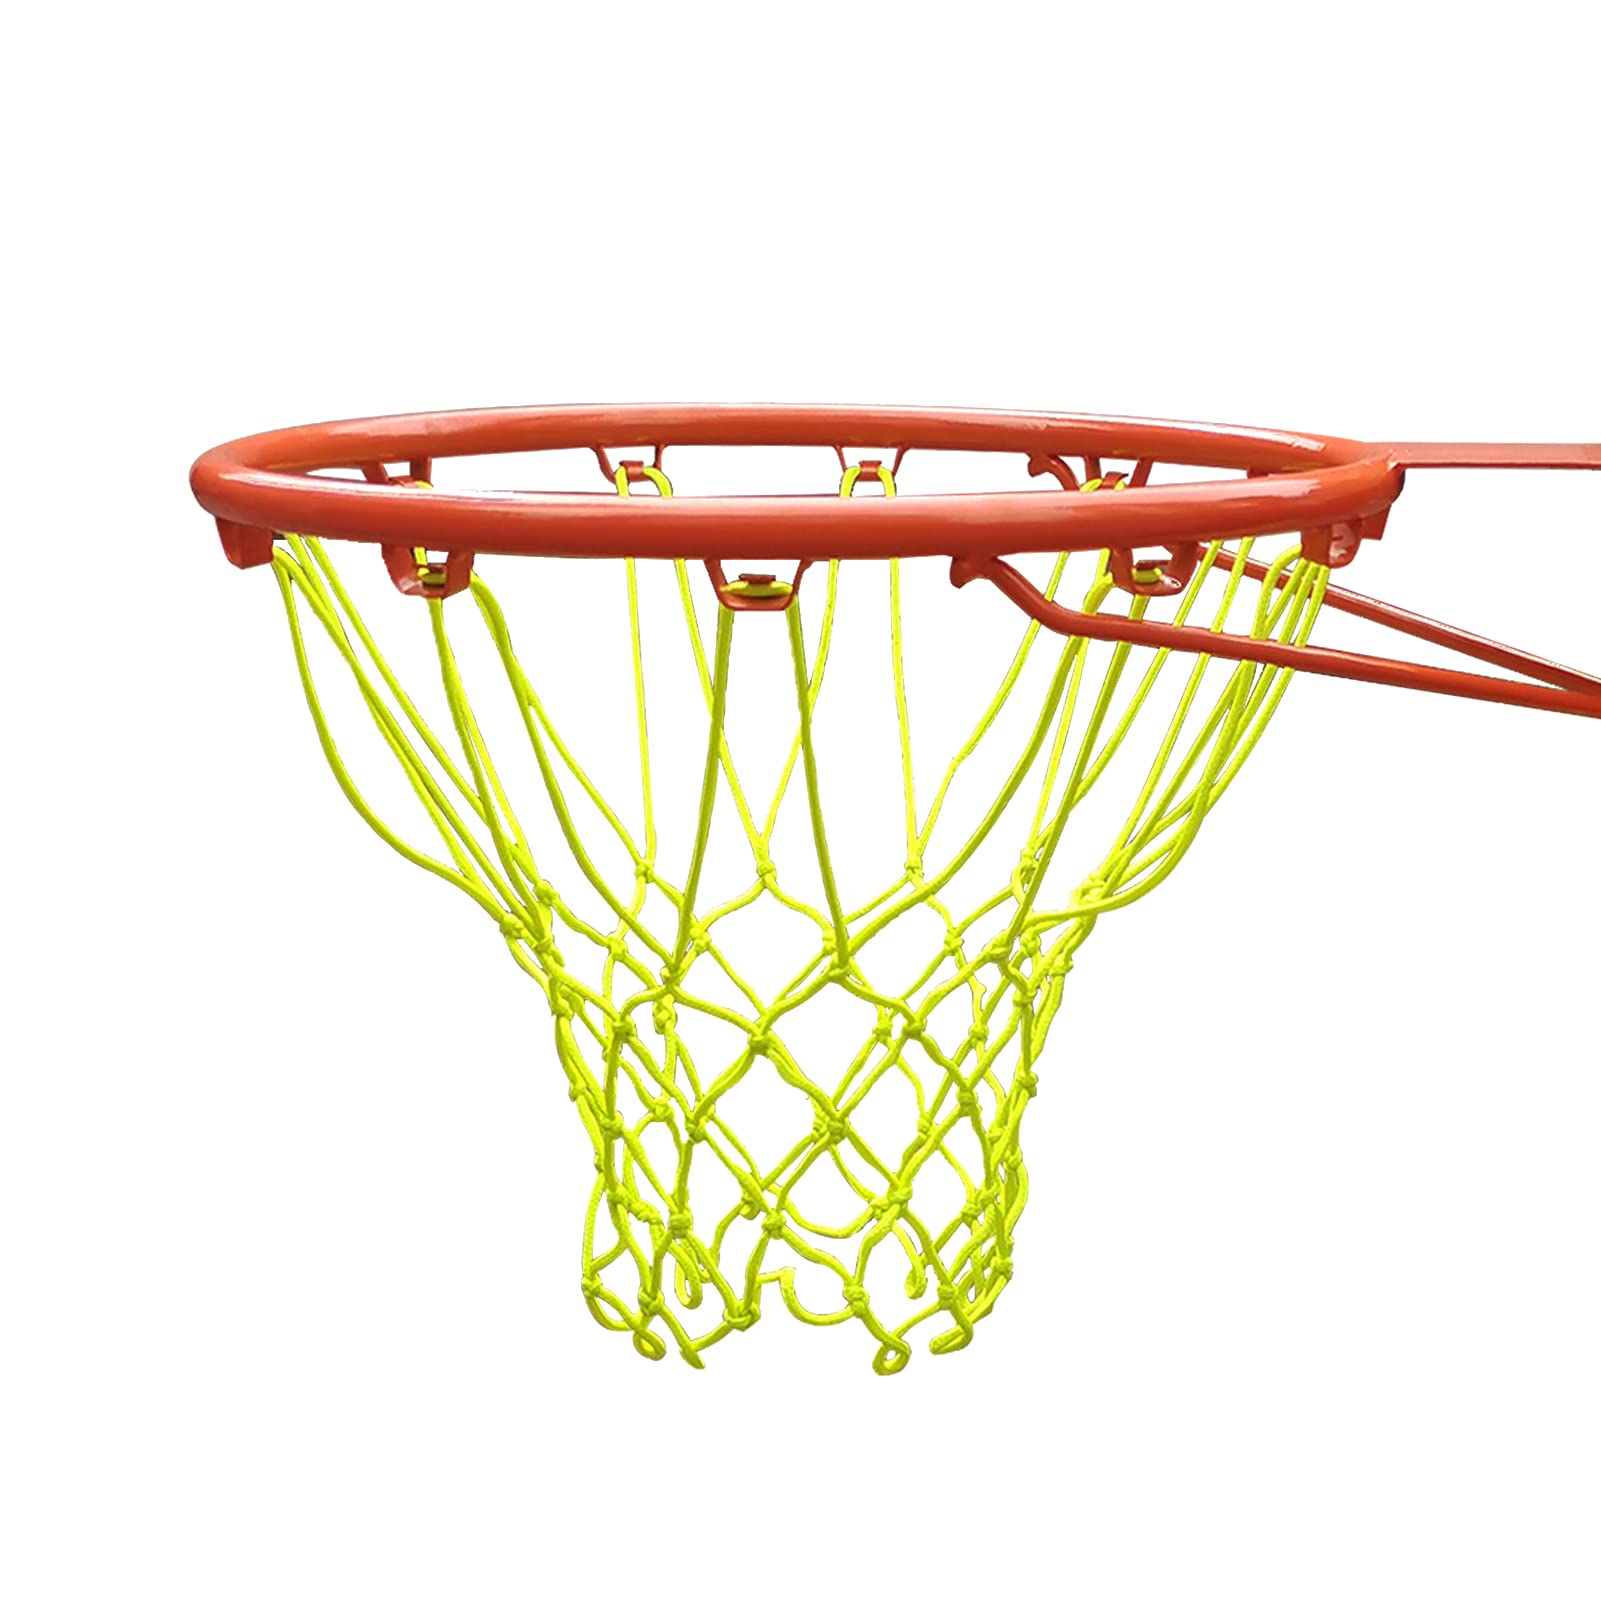 TOKBELT Basketball Net Heavy Duty Basketball Net Replacement Parts Suitable  for All Weather, Anti-Whip Basketball